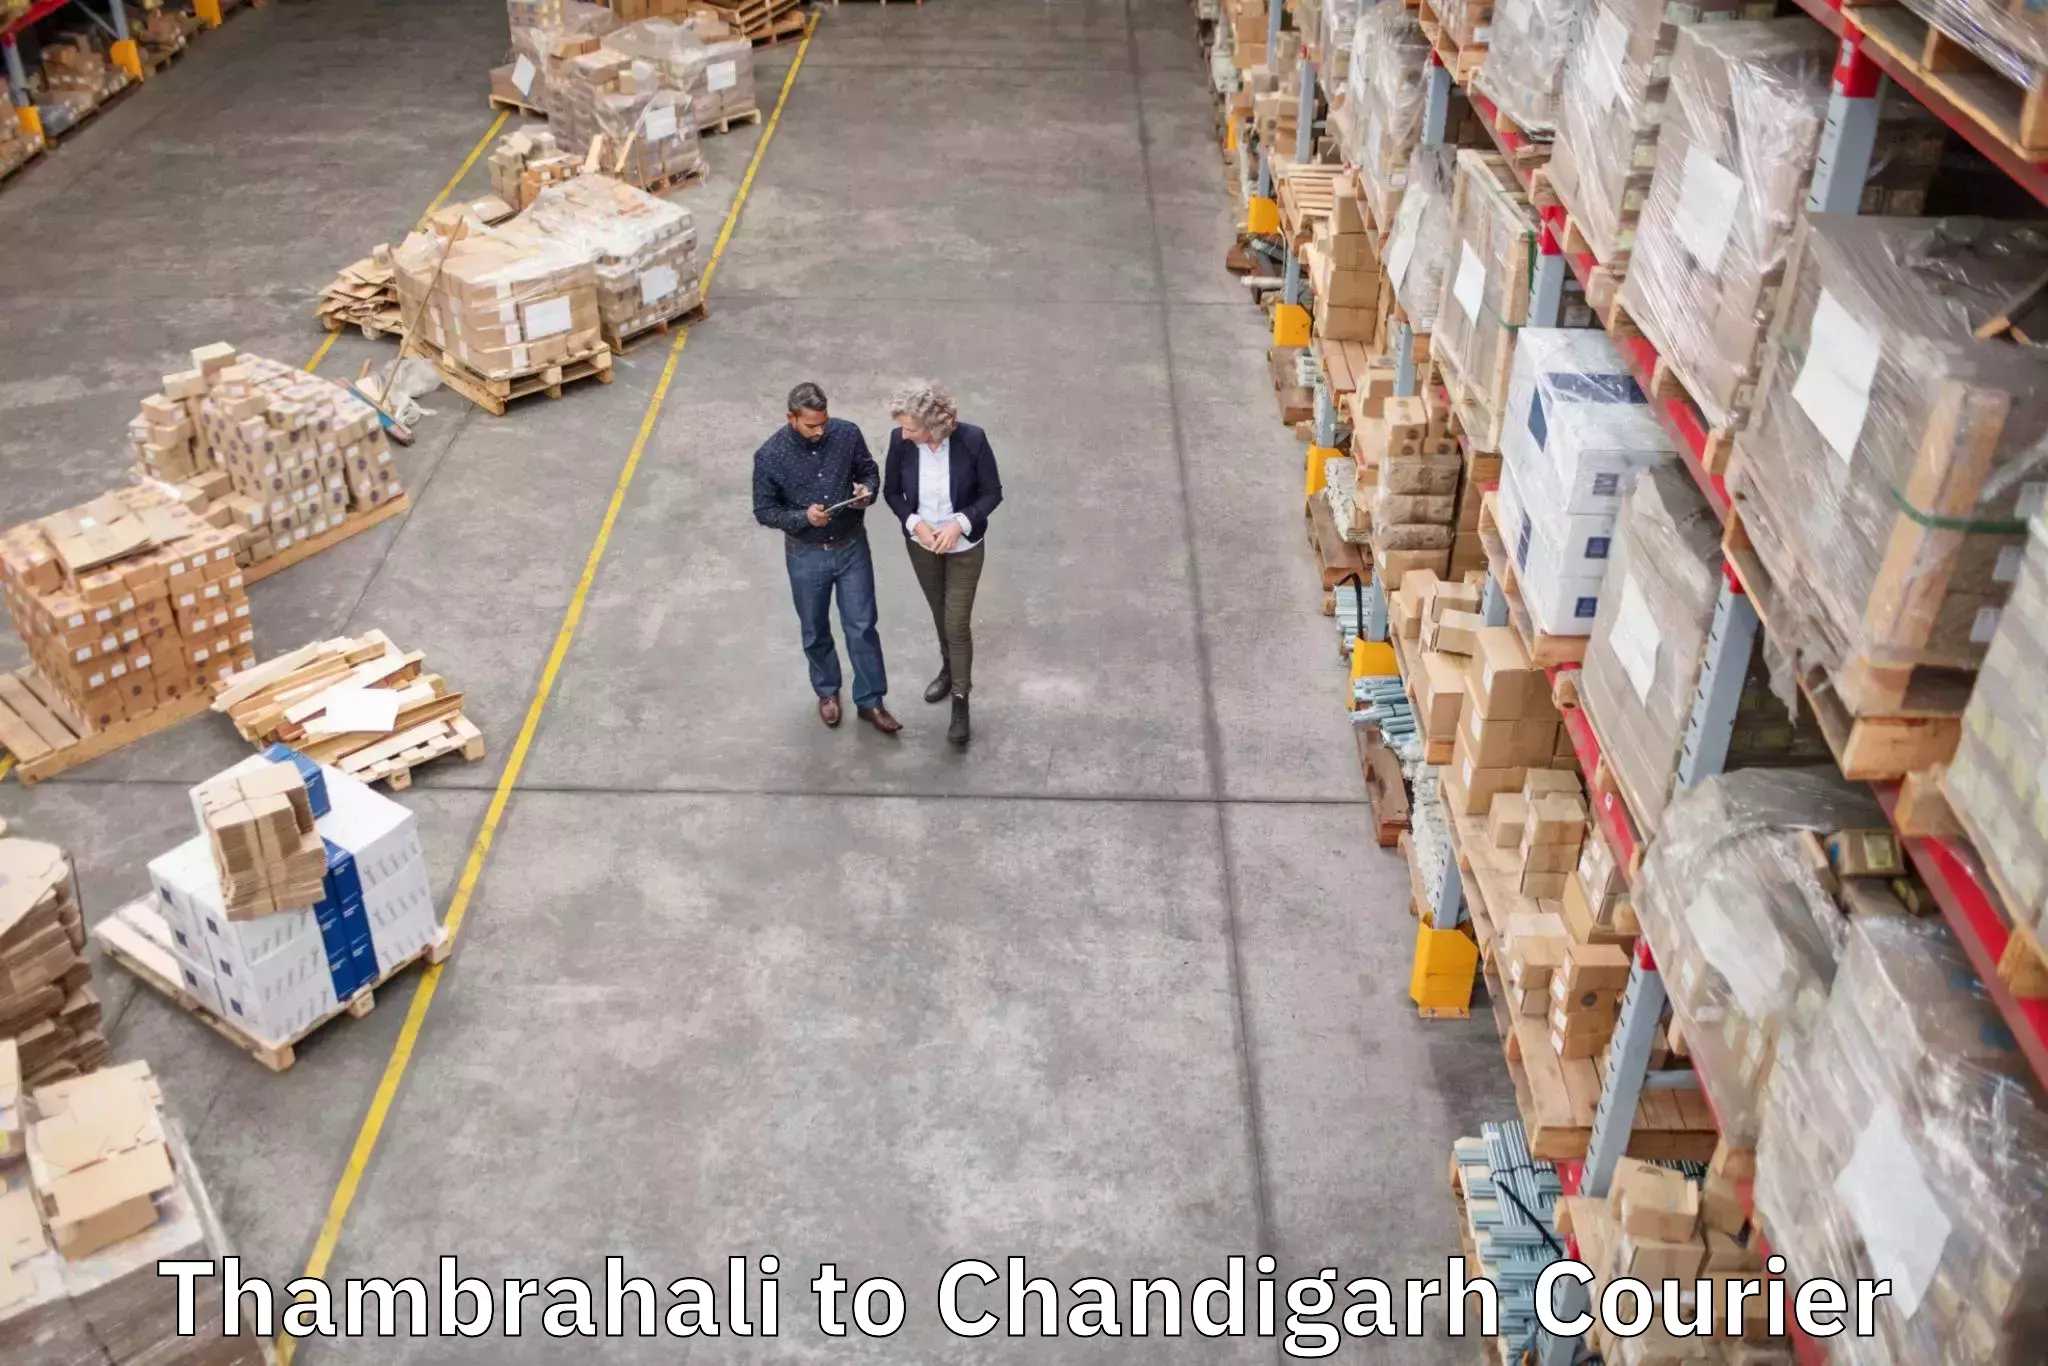 Luggage shipment specialists Thambrahali to Chandigarh